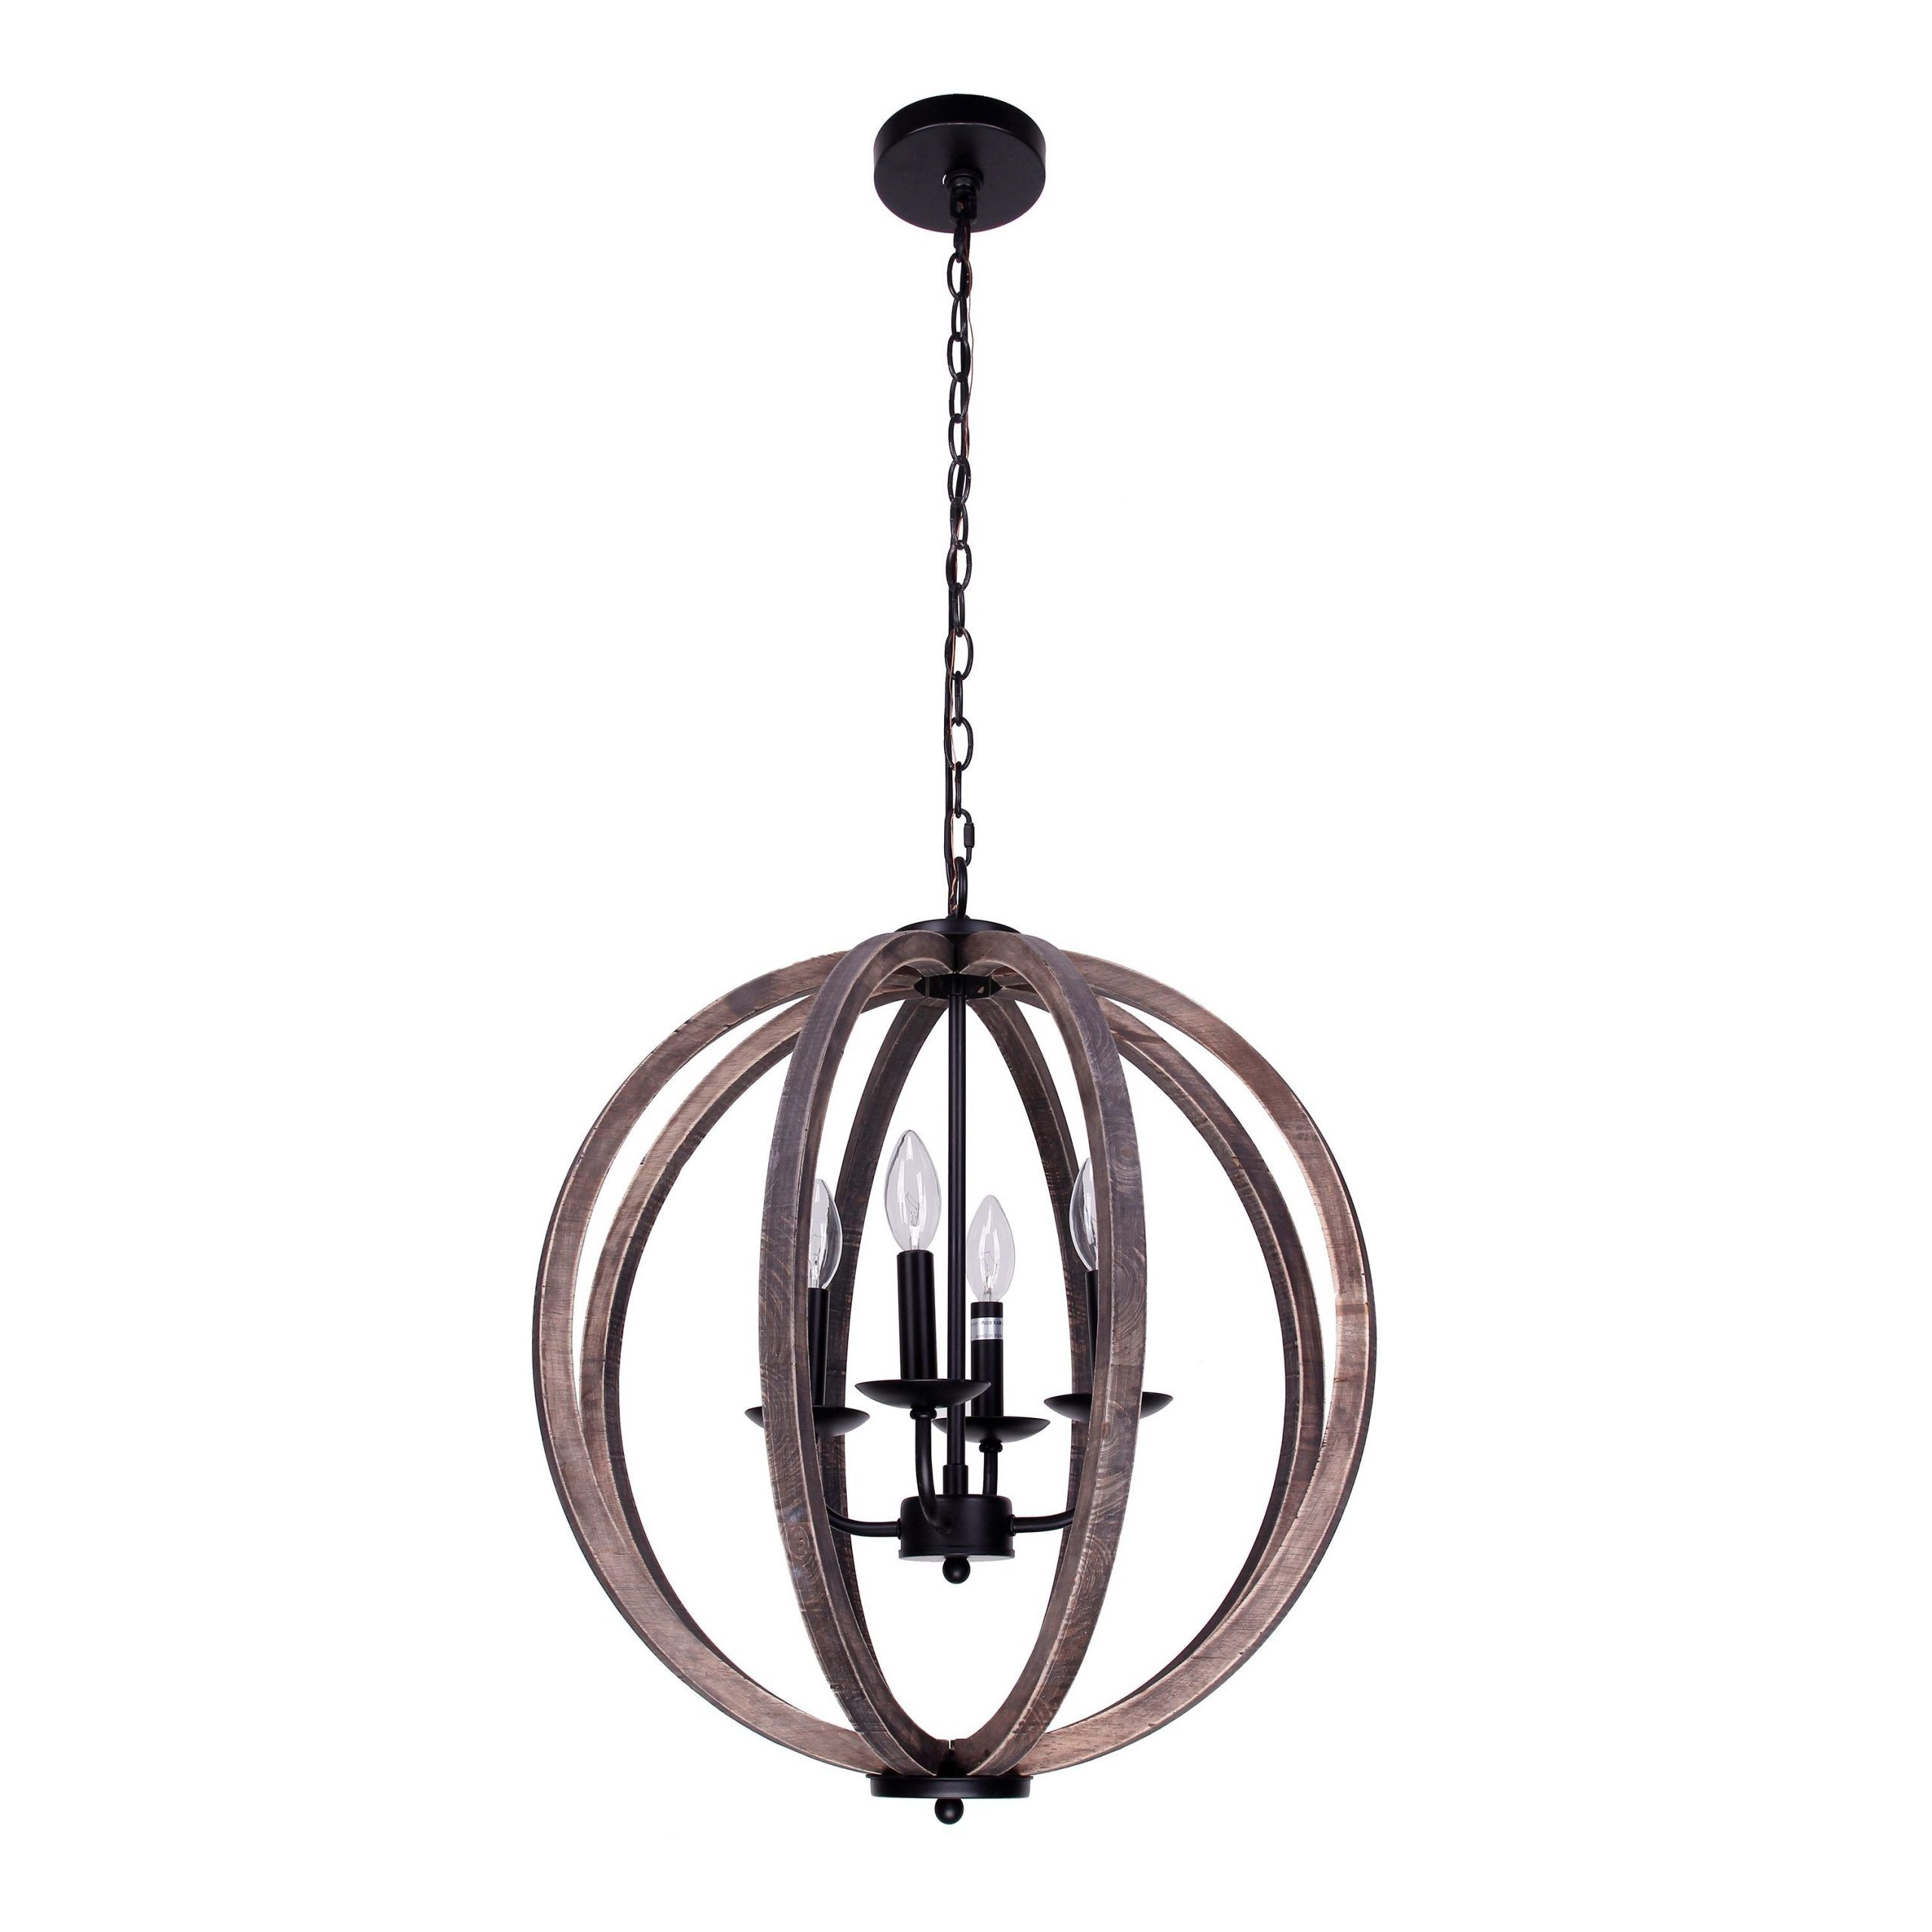 Shop 21 Inch Distressed Weathered Oak Wood 4 Light Orb Throughout Favorite Weathered Oak Wood Chandeliers (View 17 of 20)